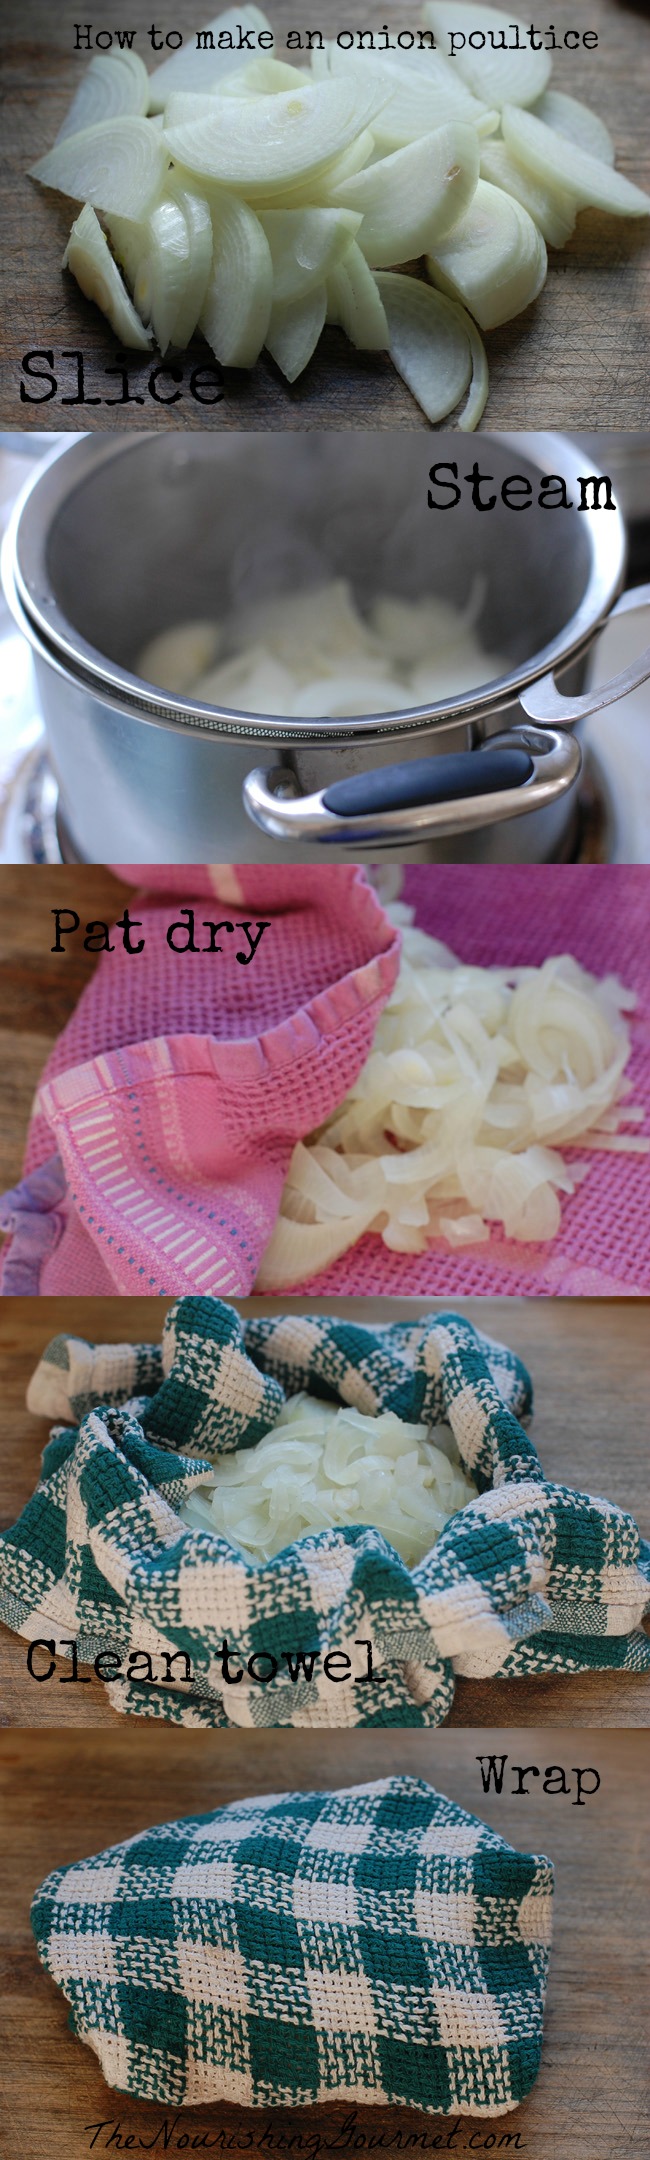 How to make an onion poultice (traditionally used for coughs and chest congestion)